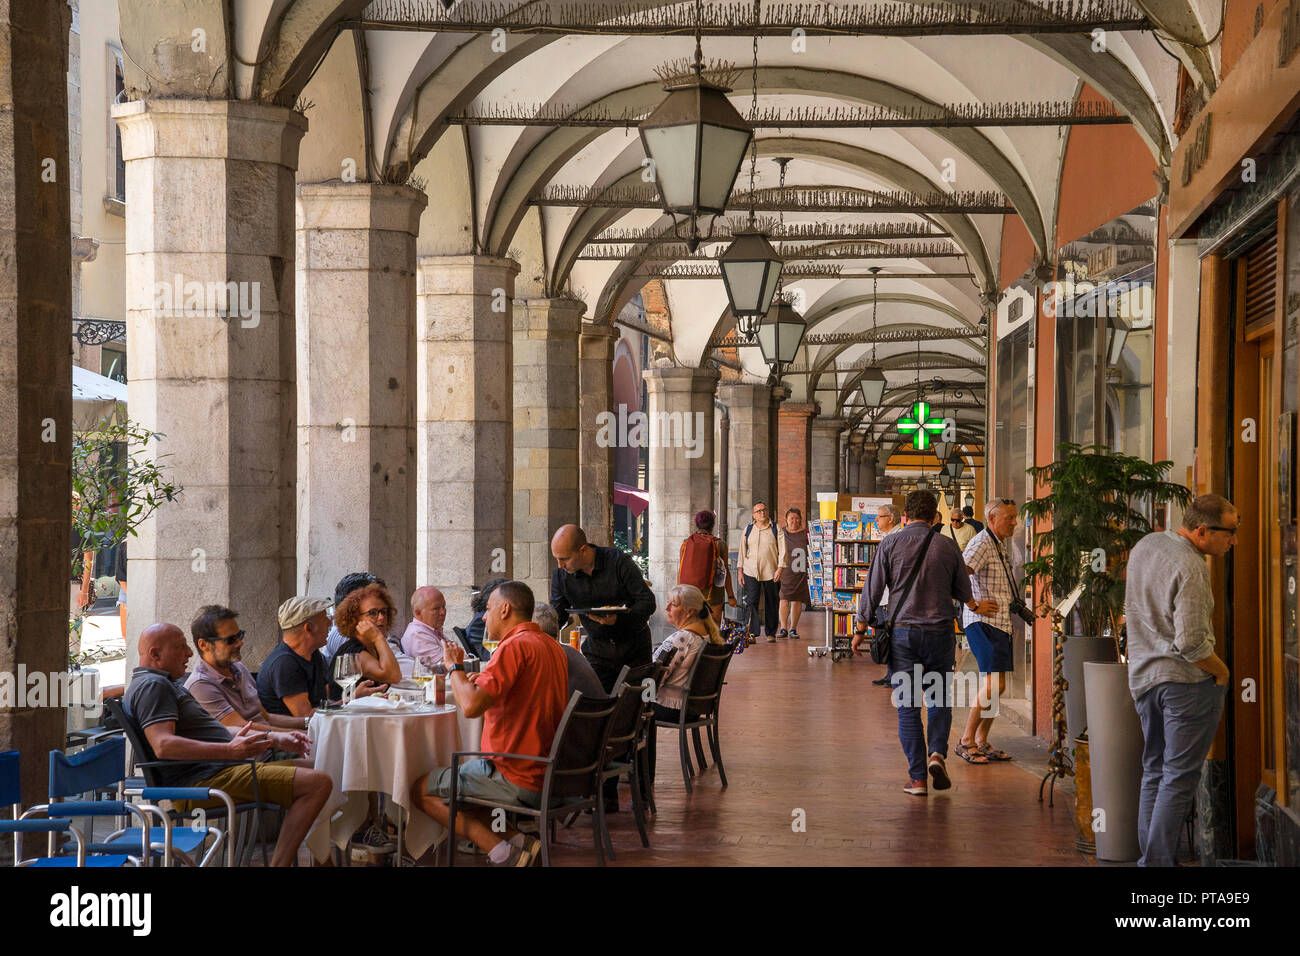 diners eating outside in colonnades in borgo stretto historical quarter of Pisa,Tuscany,Italy,Europe Stock Photo